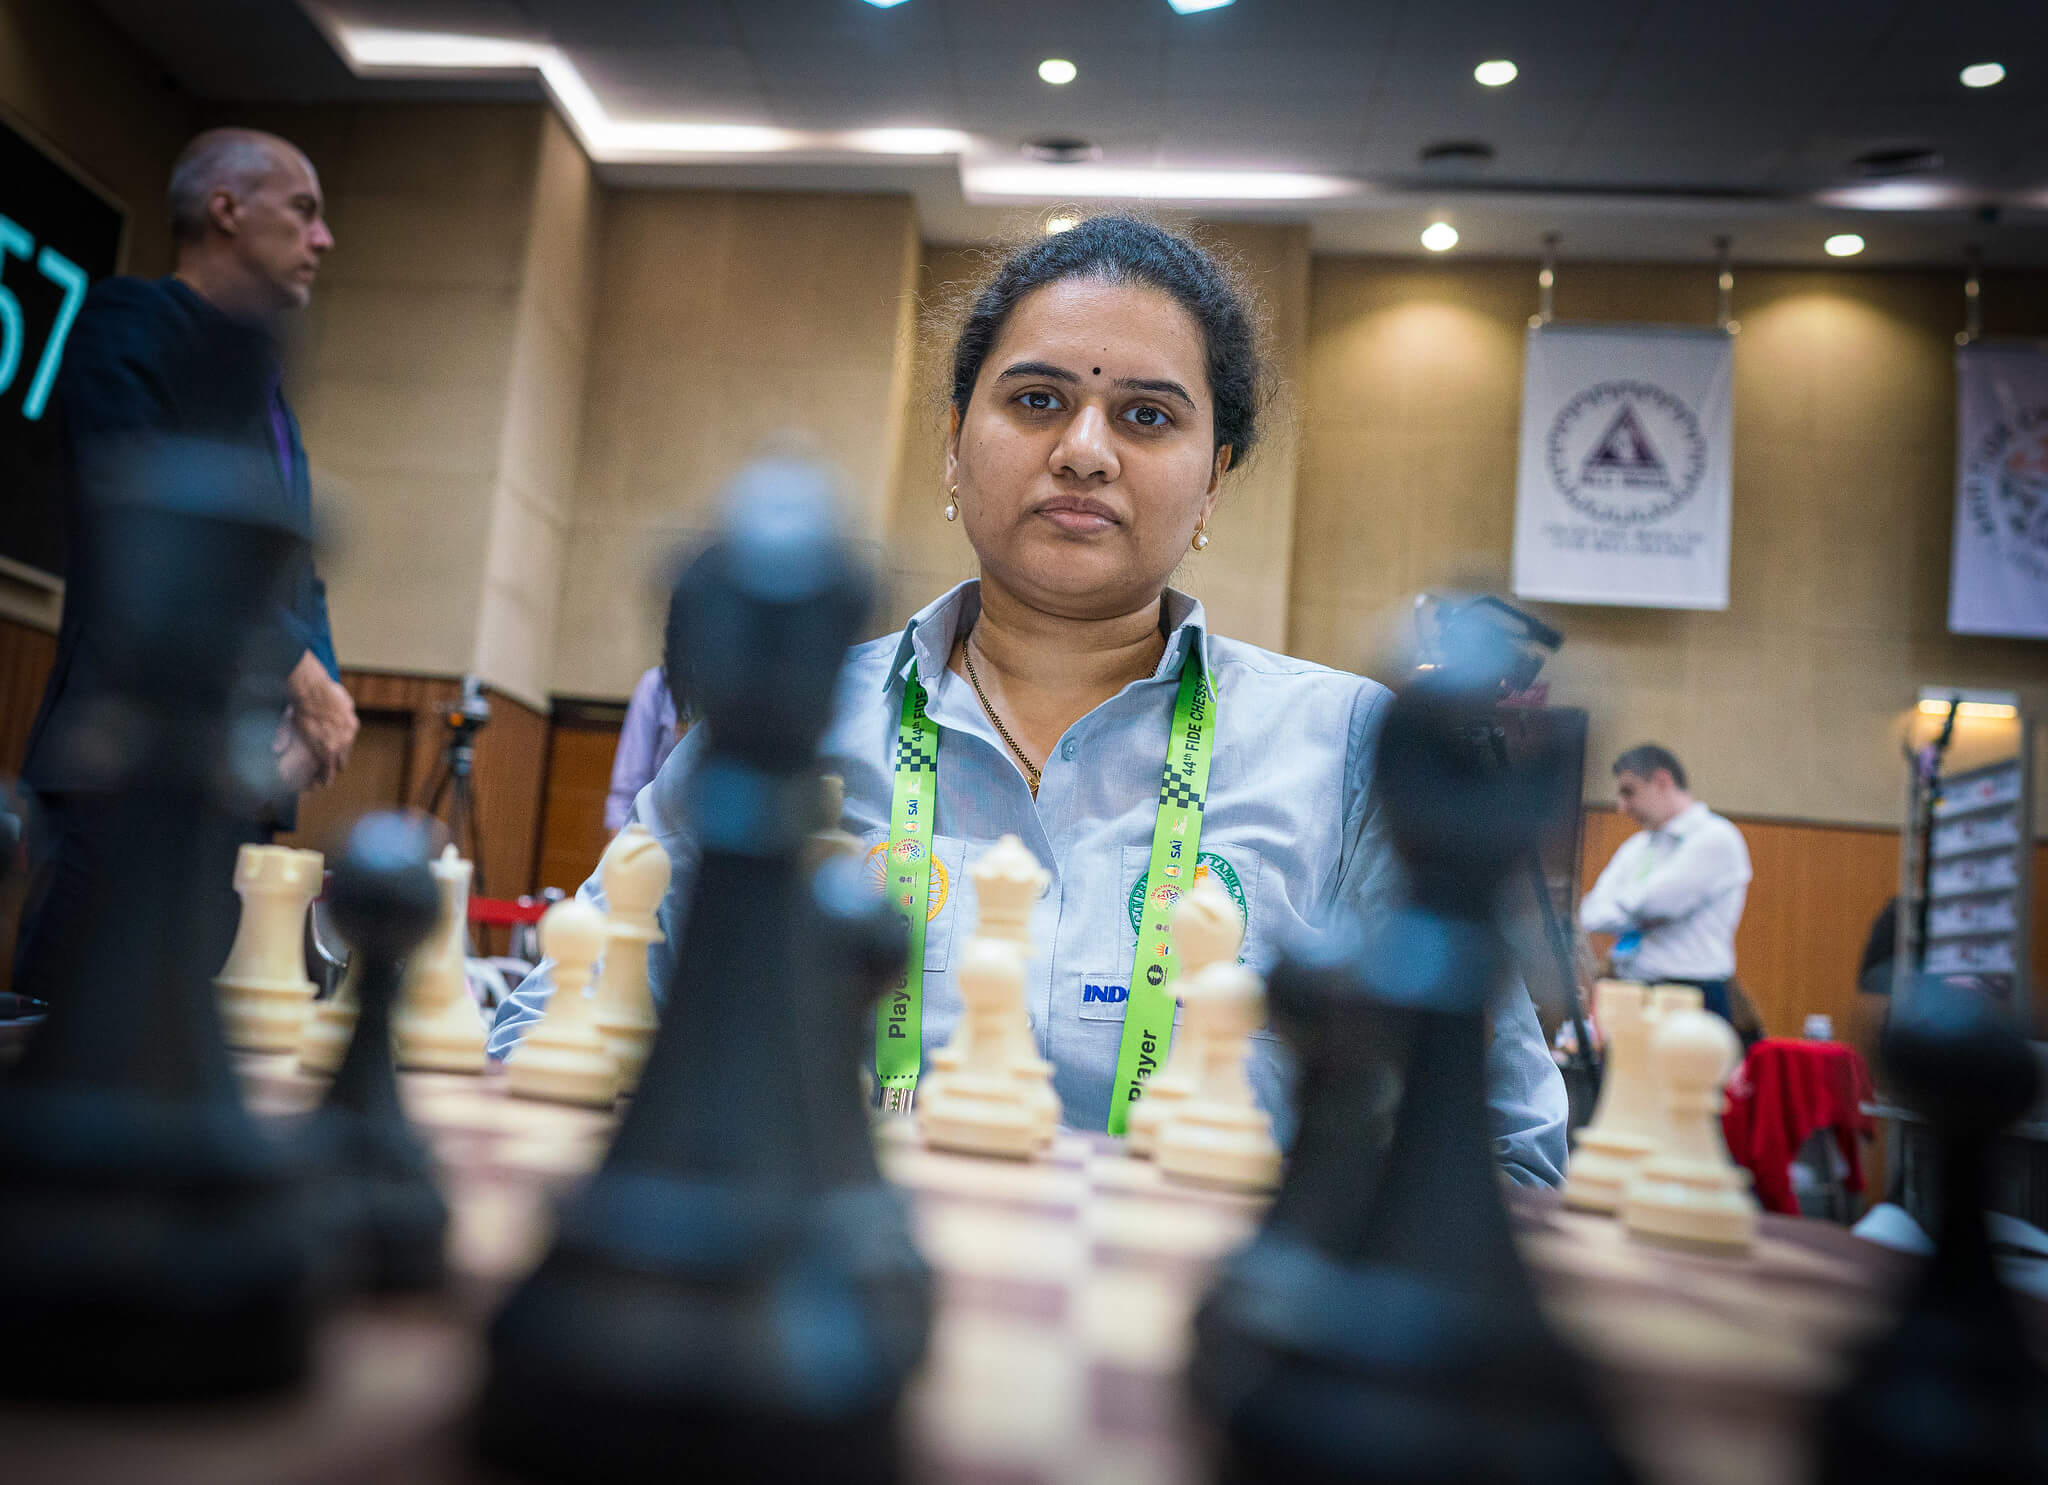 High-schoolers are ruling the 44th Chess Olympiad